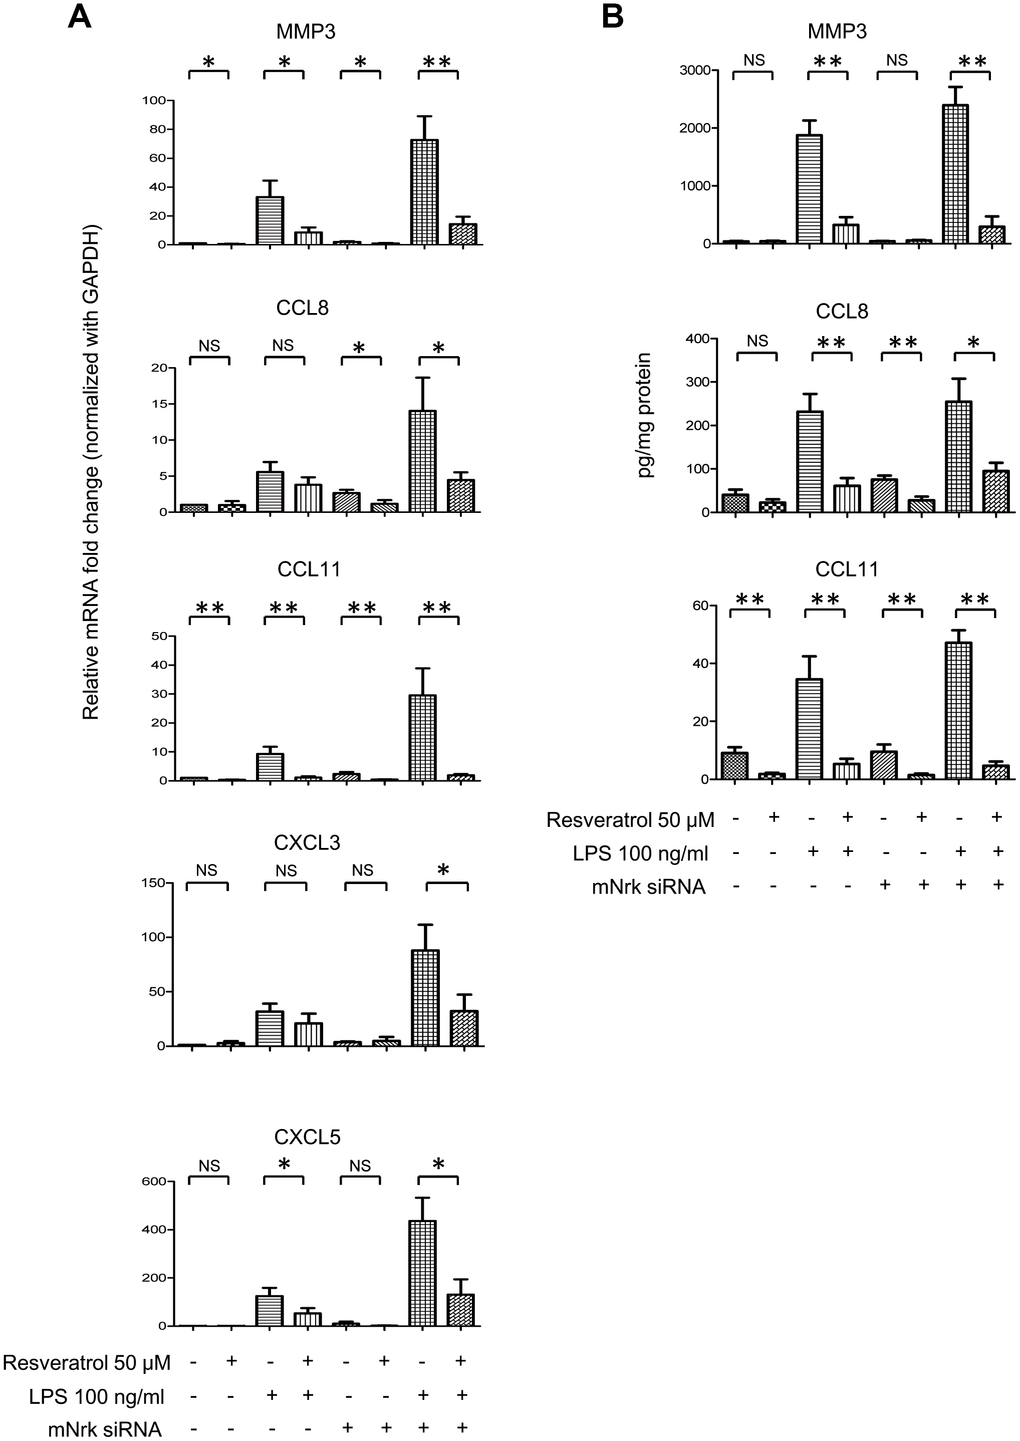 Effect of resveratrol on LPS- and Nrk siRNA-stimulated MMPs and chemokines. (A) mVSMCs were serum starved (0.5% FBS in DMEM) for 24 h and then treated with LPS (100 ng/mL) and/or resveratrol (50 μM) for 24 h. Cells were further transfected with 20 nM of negative control or mNrk siRNA for an additional 48 h. Expression of (A) MMP3 (n=8), CCL8 (n=8), CCL11 (n=8), CXCL3 (n=6) and CXCL5 (n=6) was determined by qPCR. Gene expression results of qPCR analysis were normalized to both control cells as well as GAPDH. (B) Protein levels of MMP3 (n=7), CCL8 (n=6) and CCL11 (n=7) in cultured conditioned media were determined by ELISA (normalized to total protein concentration). Scale bars: means ± SD. *, p p p0.001.